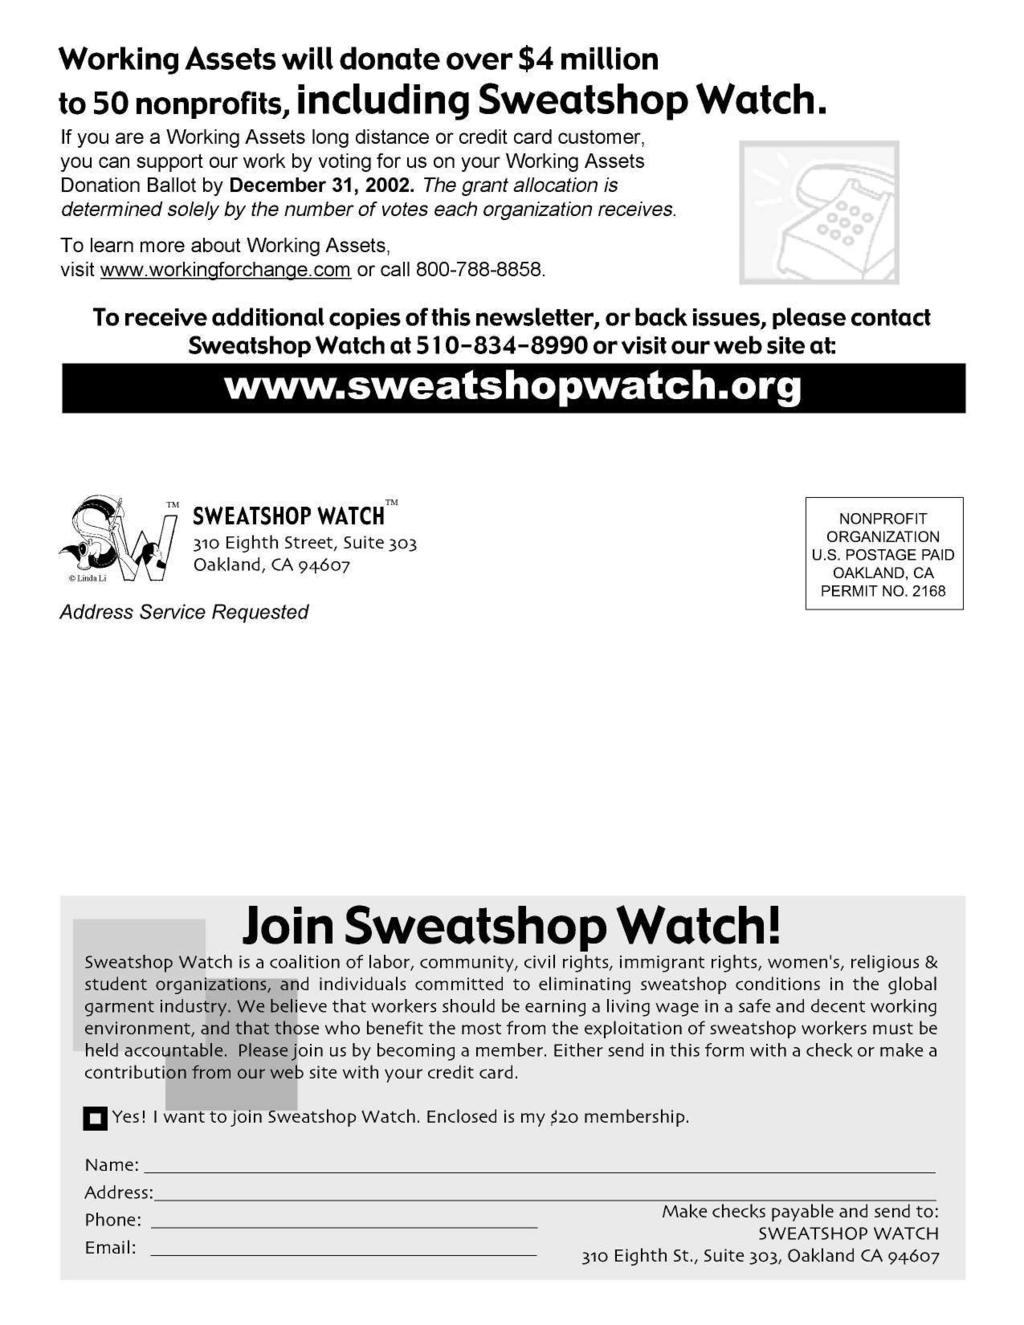 Working Assets will donate over $4 million to 50 nonprofits,including Sweatshop Watch.